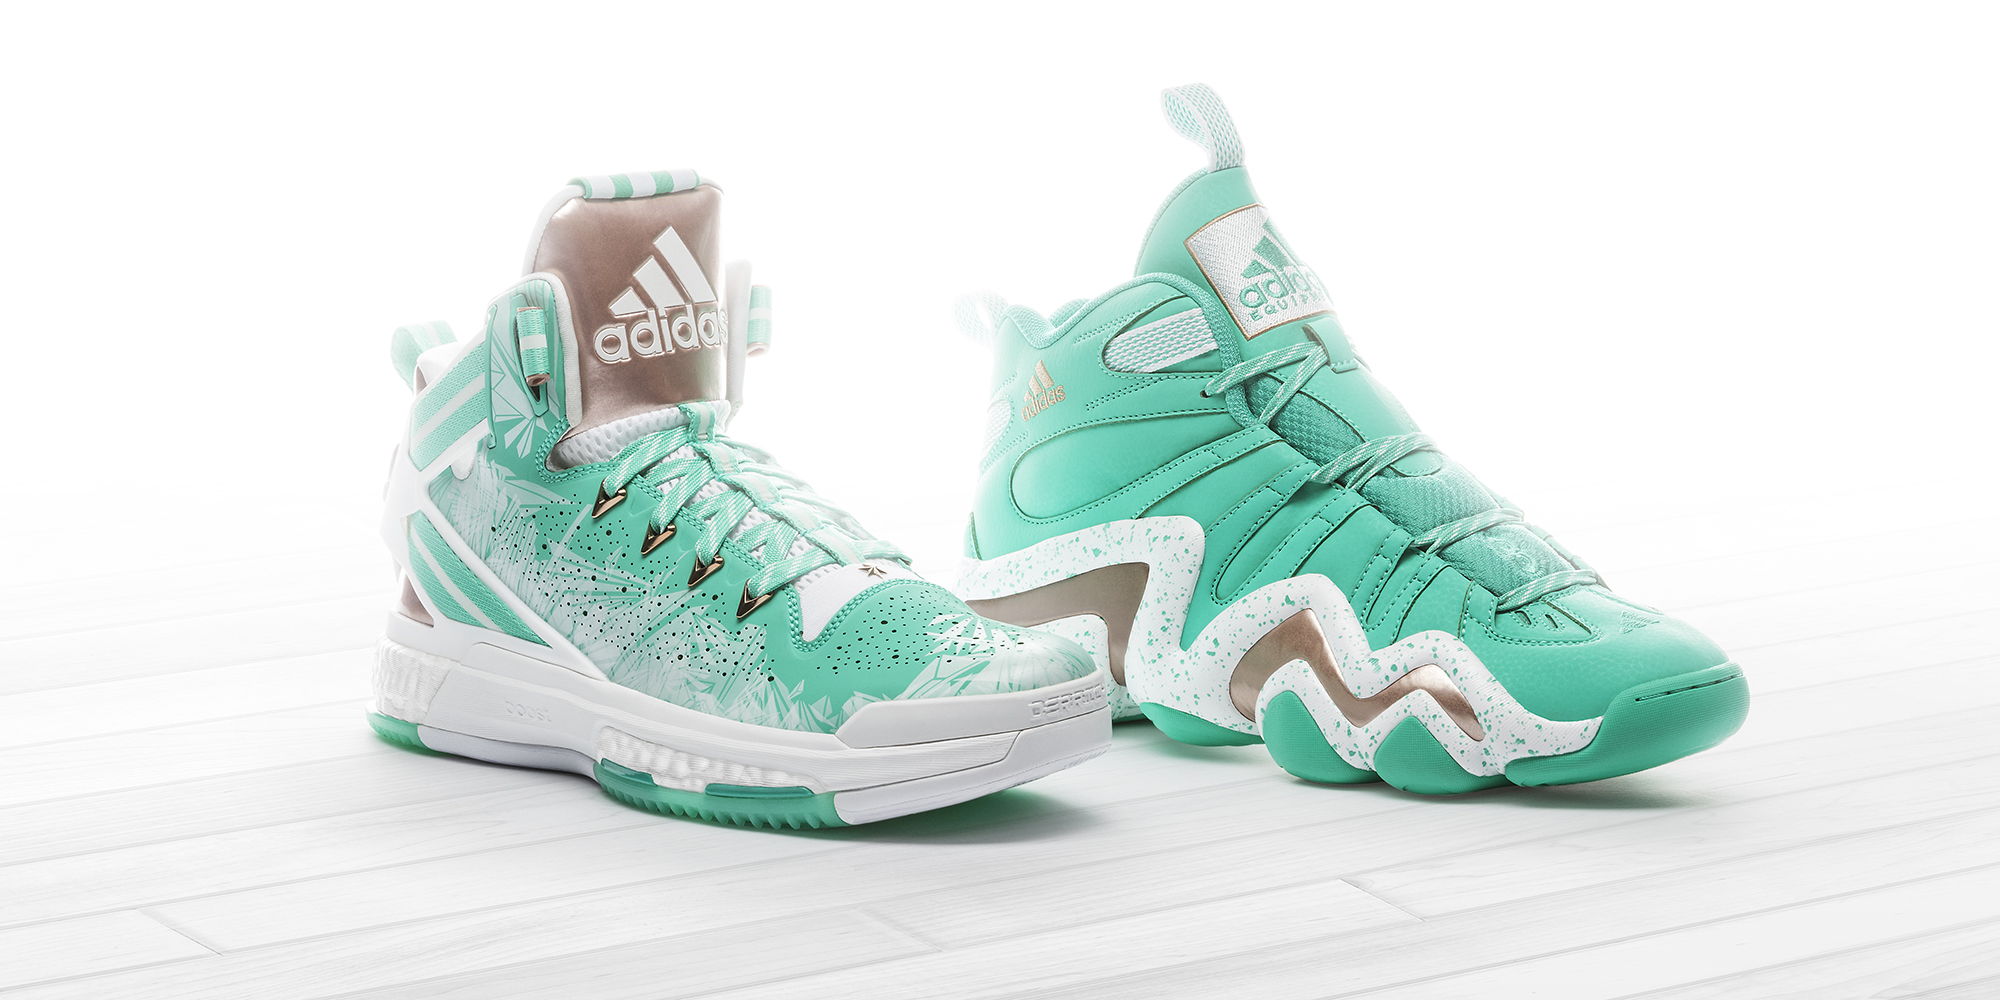 adidas Hoops Unveils 2015 Christmas Collection 4